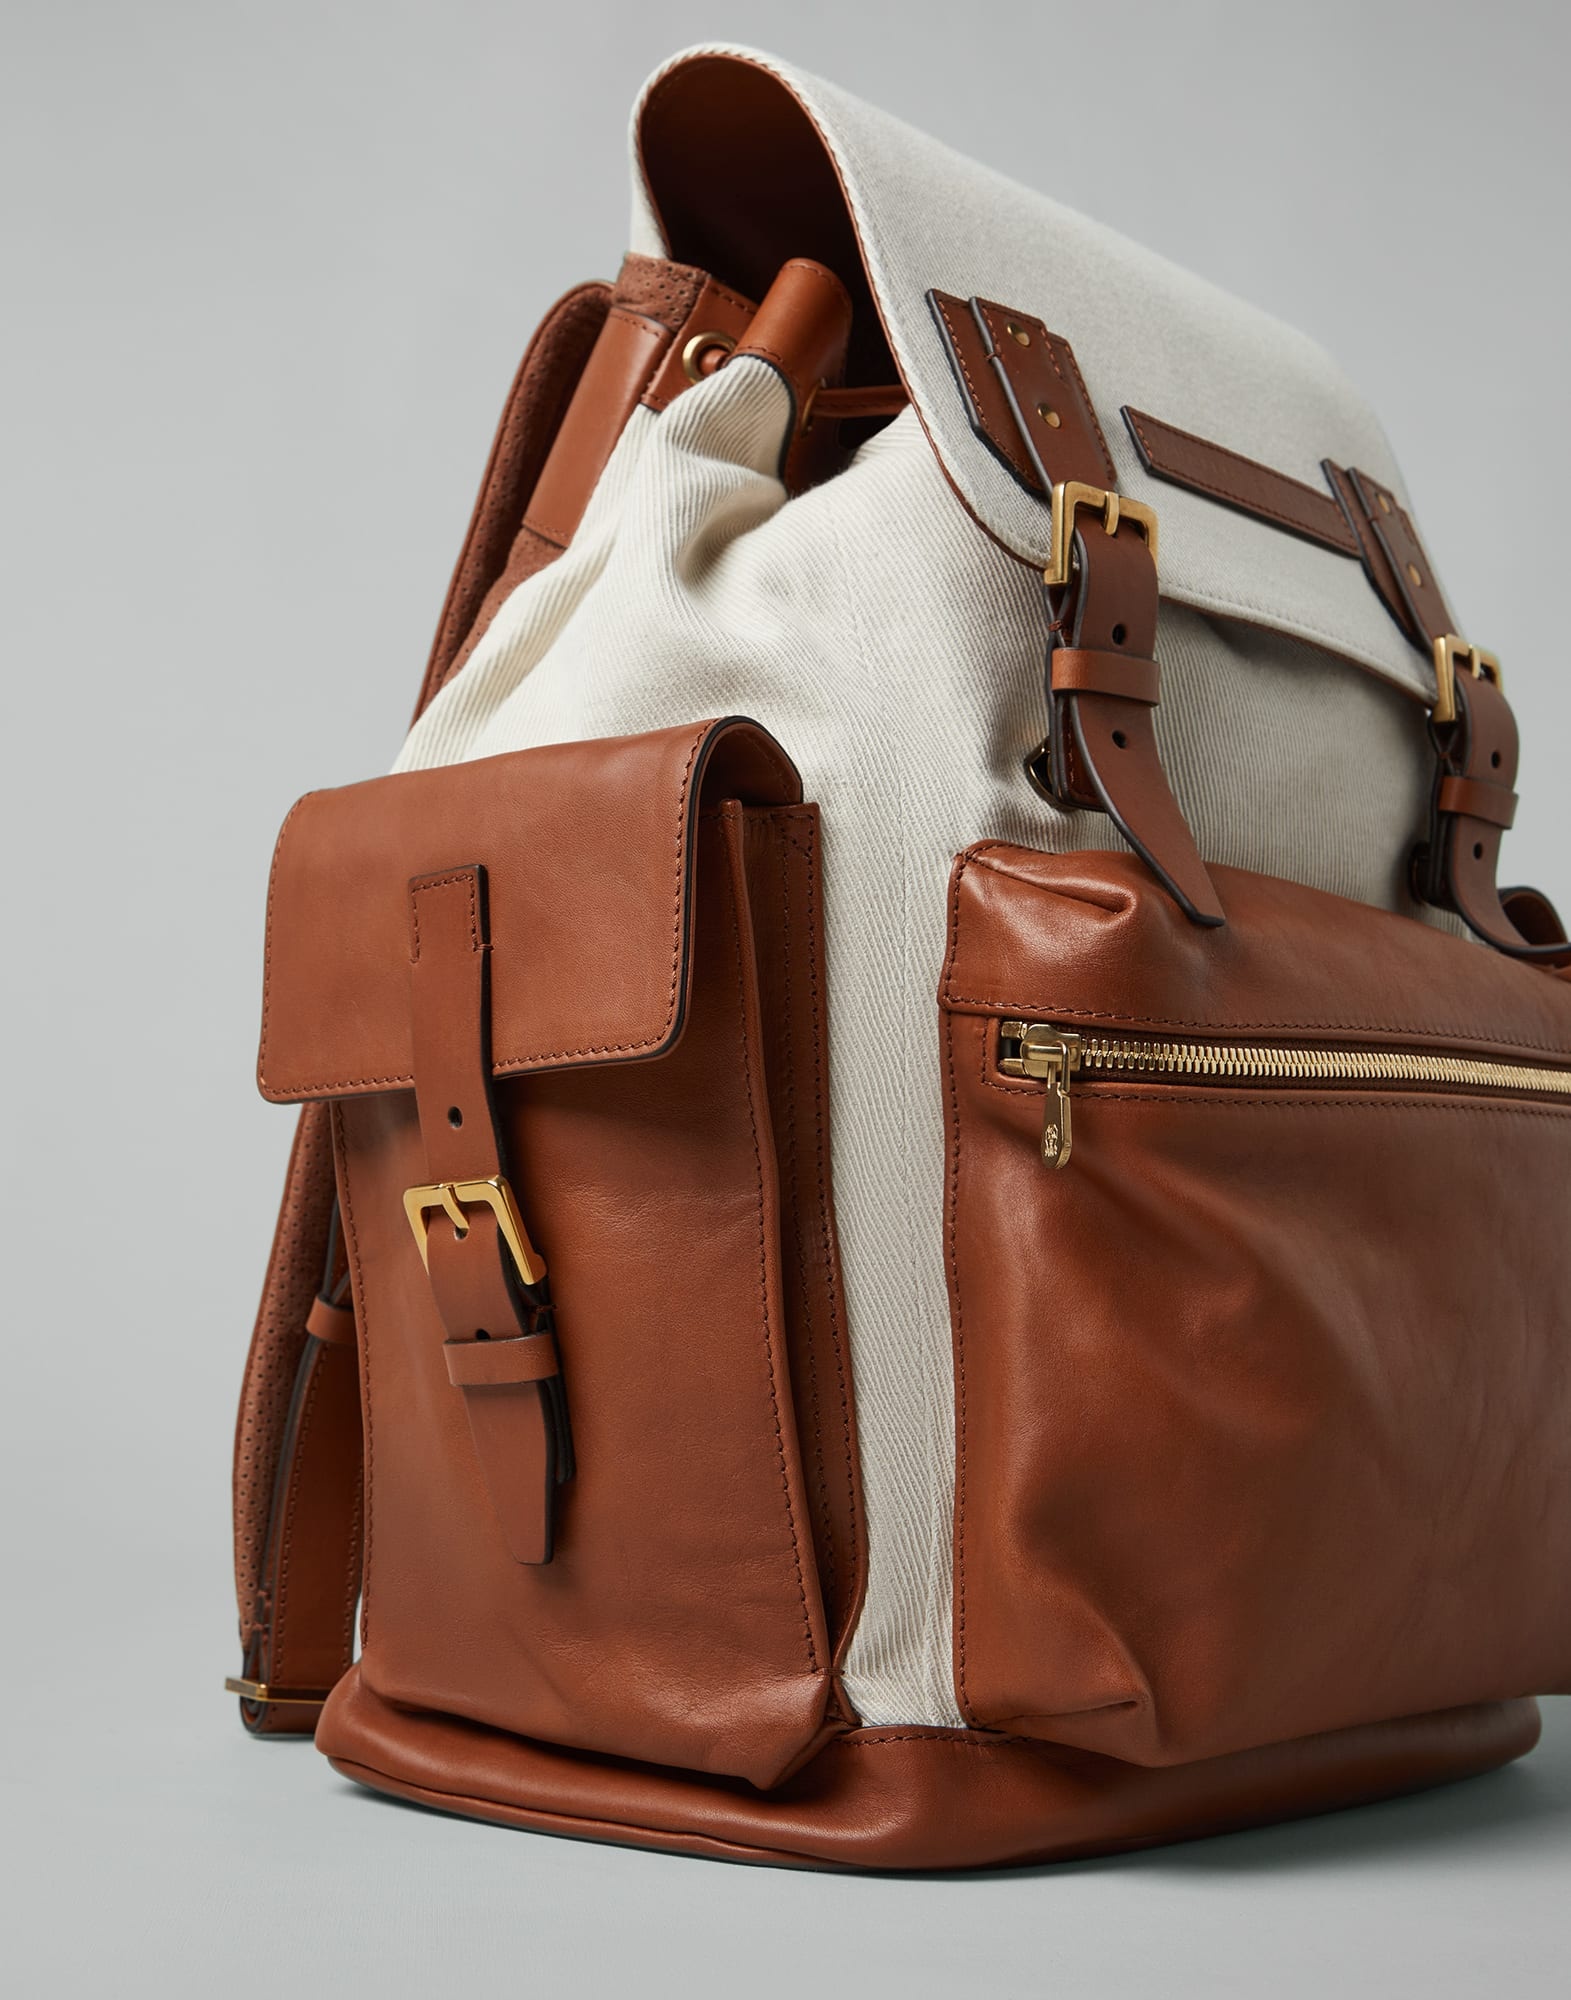 Cotton and linen cavalry and calfskin city backpack - 3